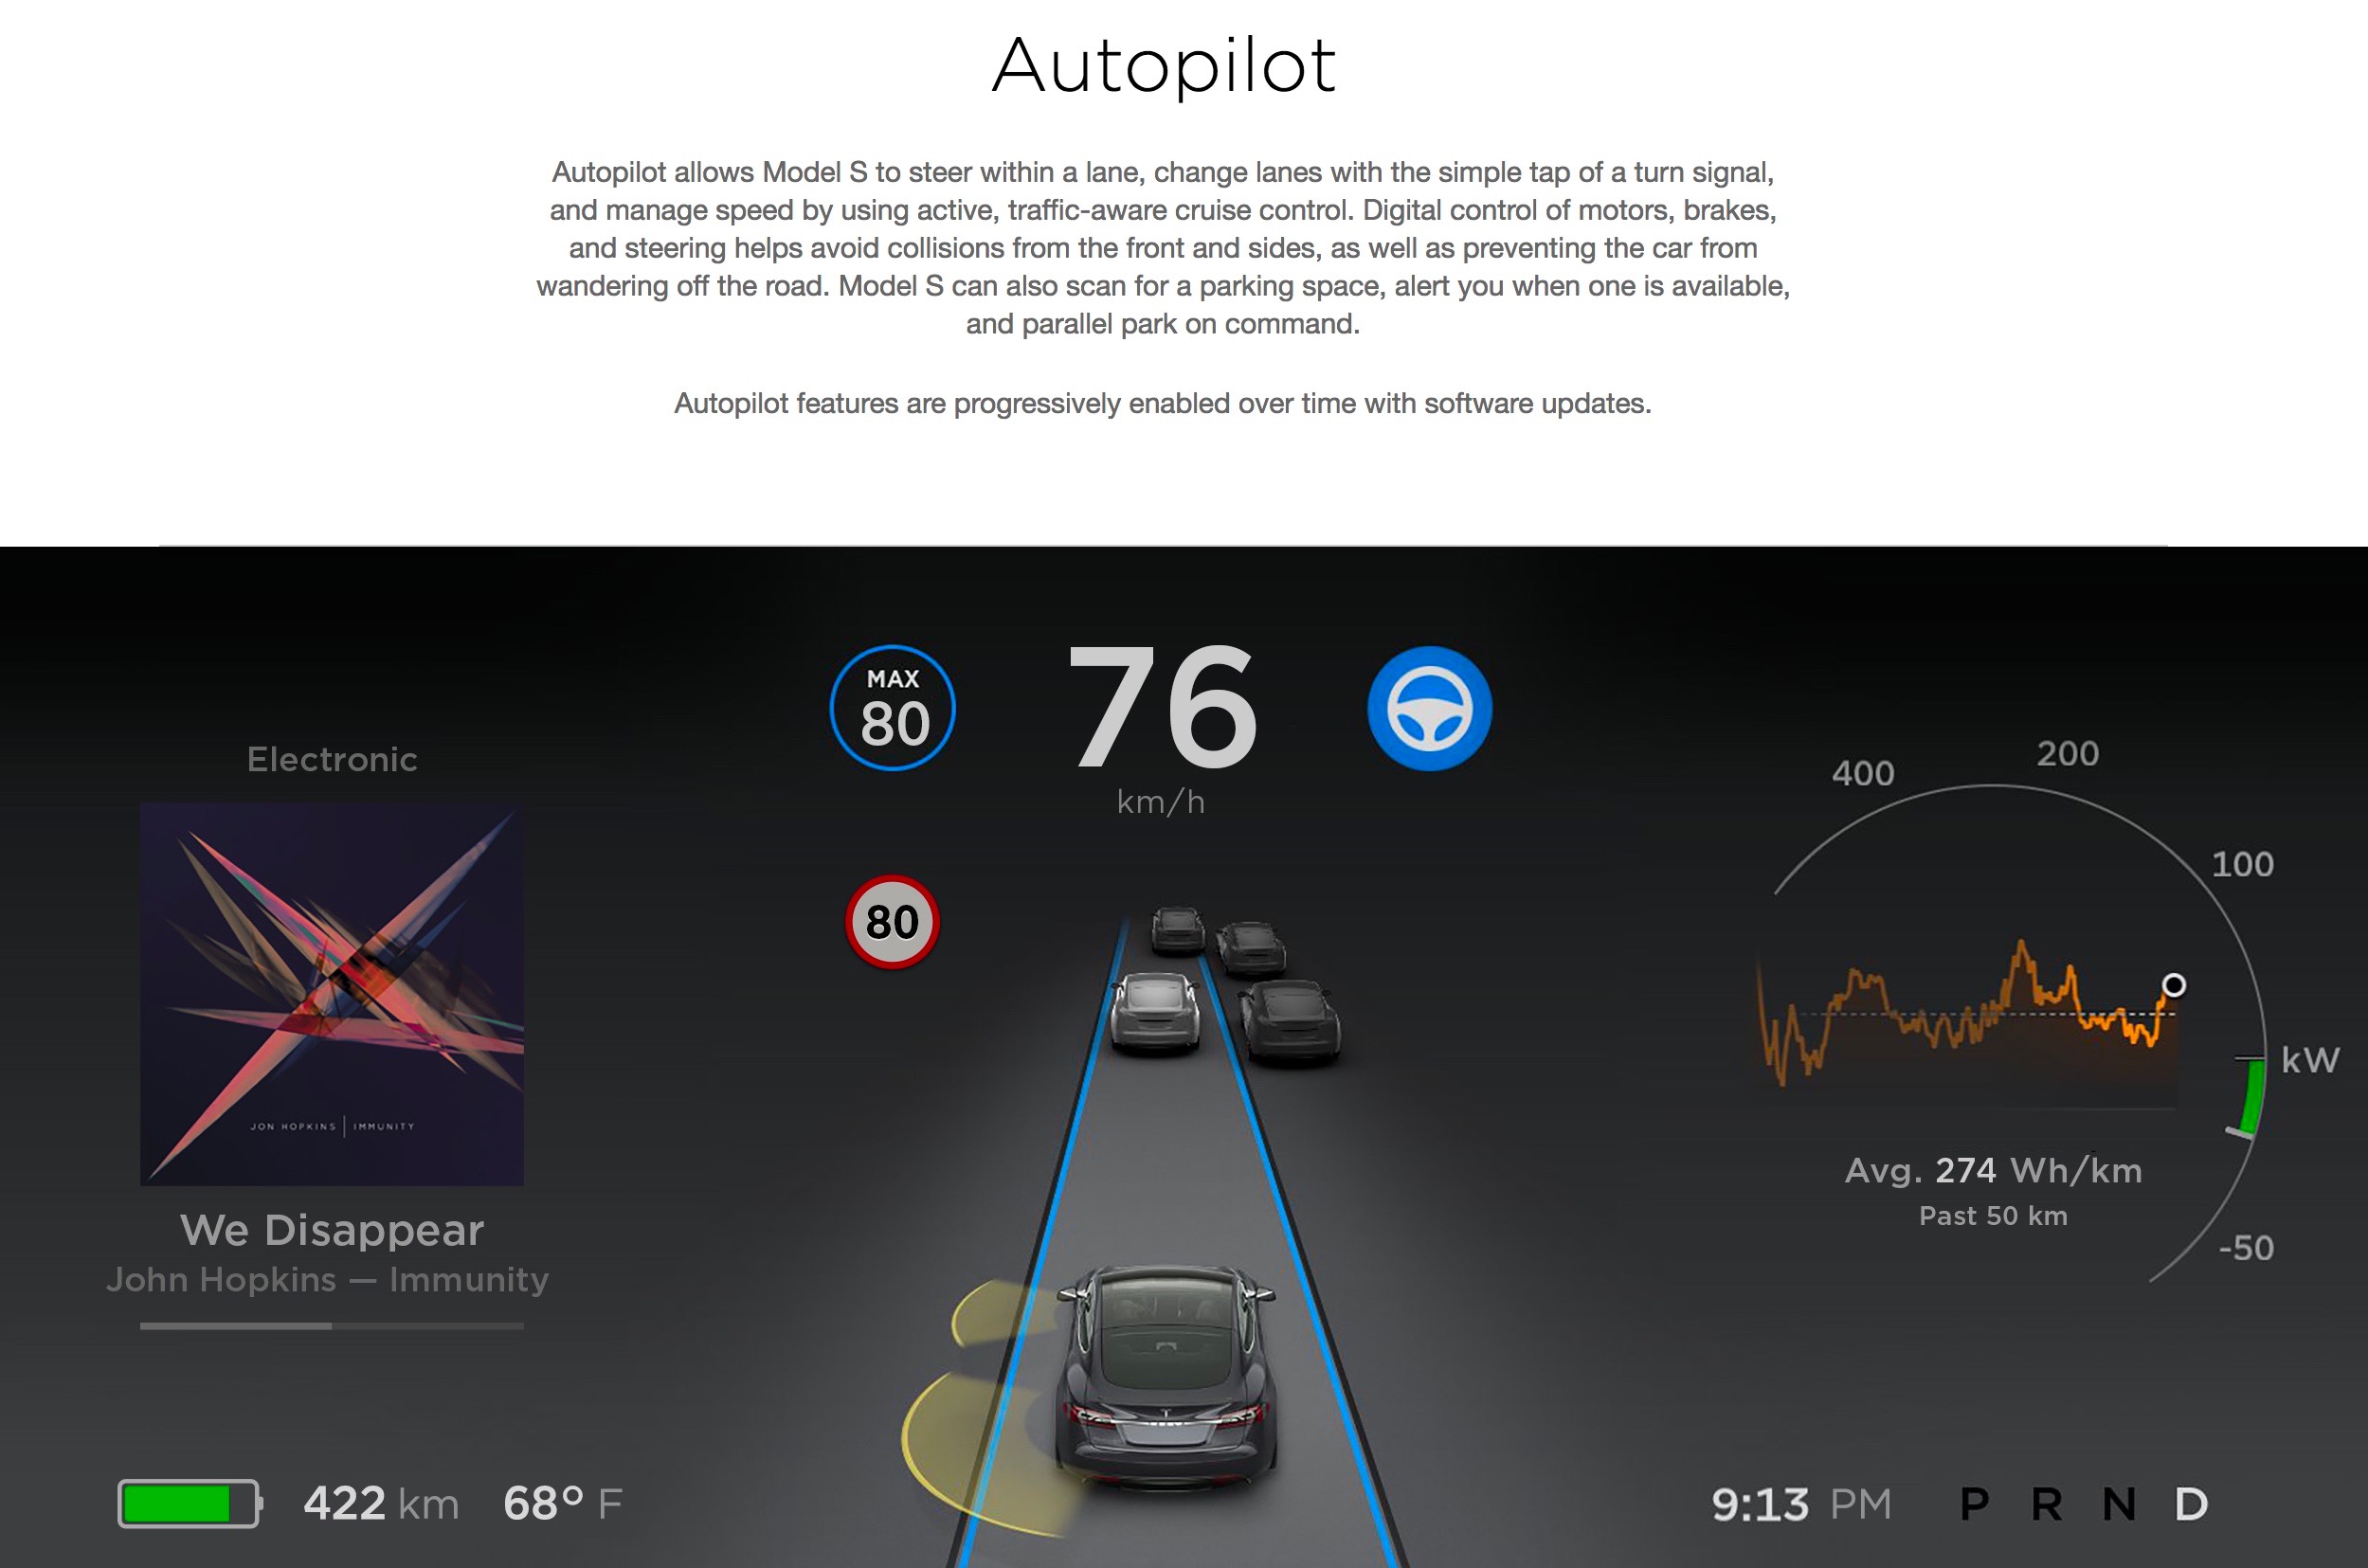 German transport ministry calls for Tesla to withdraw ‘autopilot’ advertising